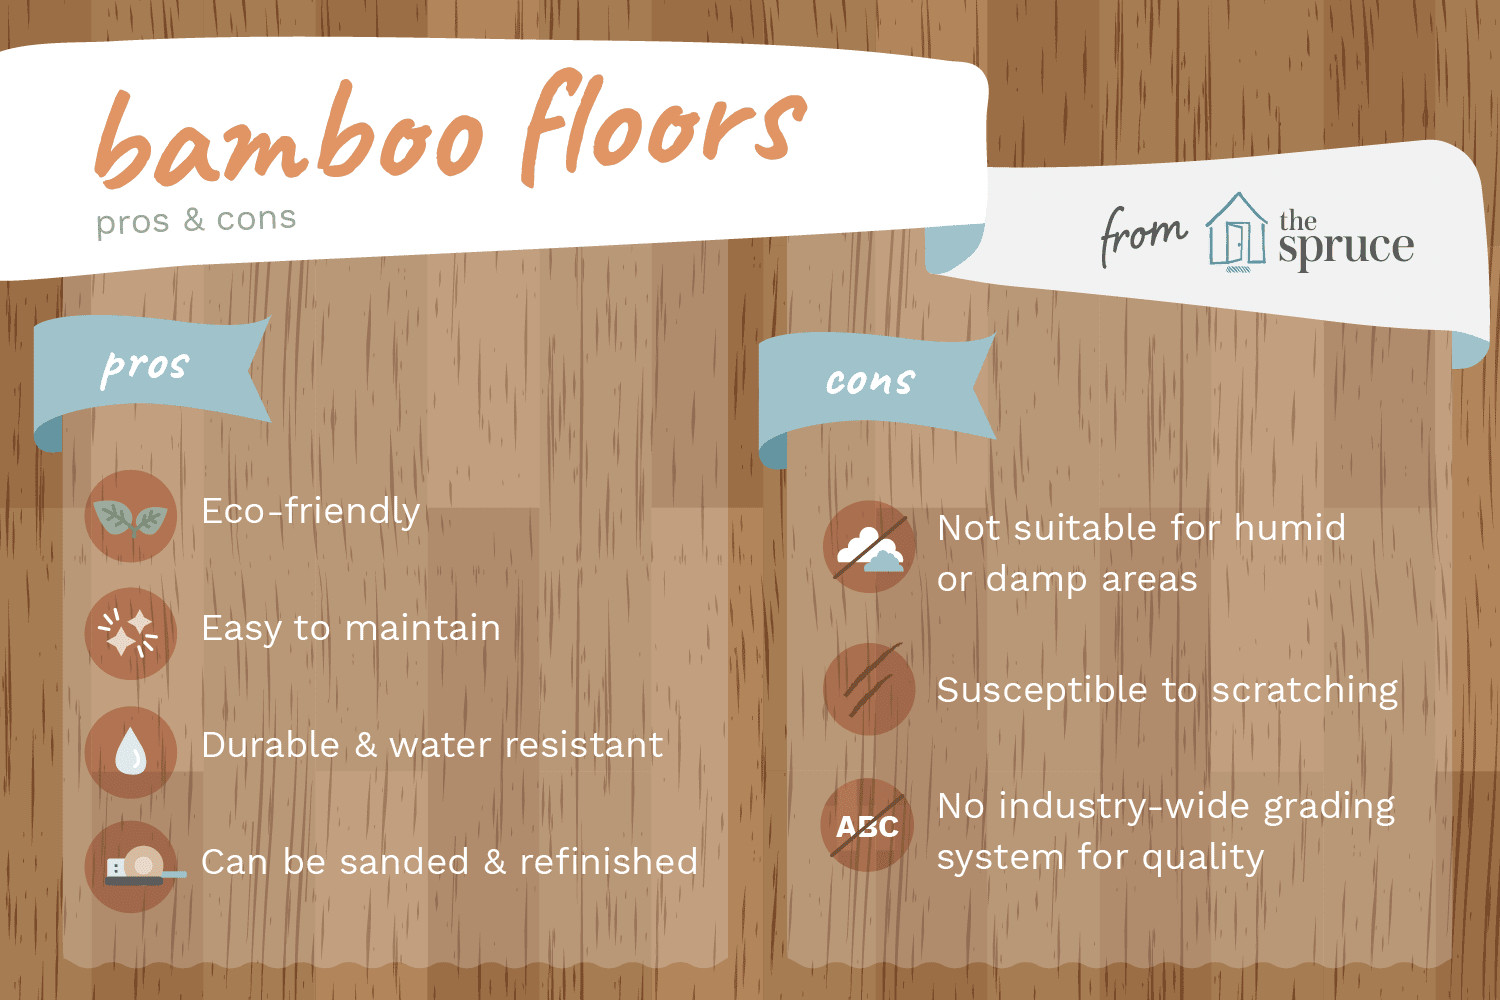 hardwood floor gouge repair kit of the advantages and disadvantages of bamboo flooring with regard to benefits and drawbacks of bamboo floors 1314694 v3 5b102fccff1b780036c0a4fa